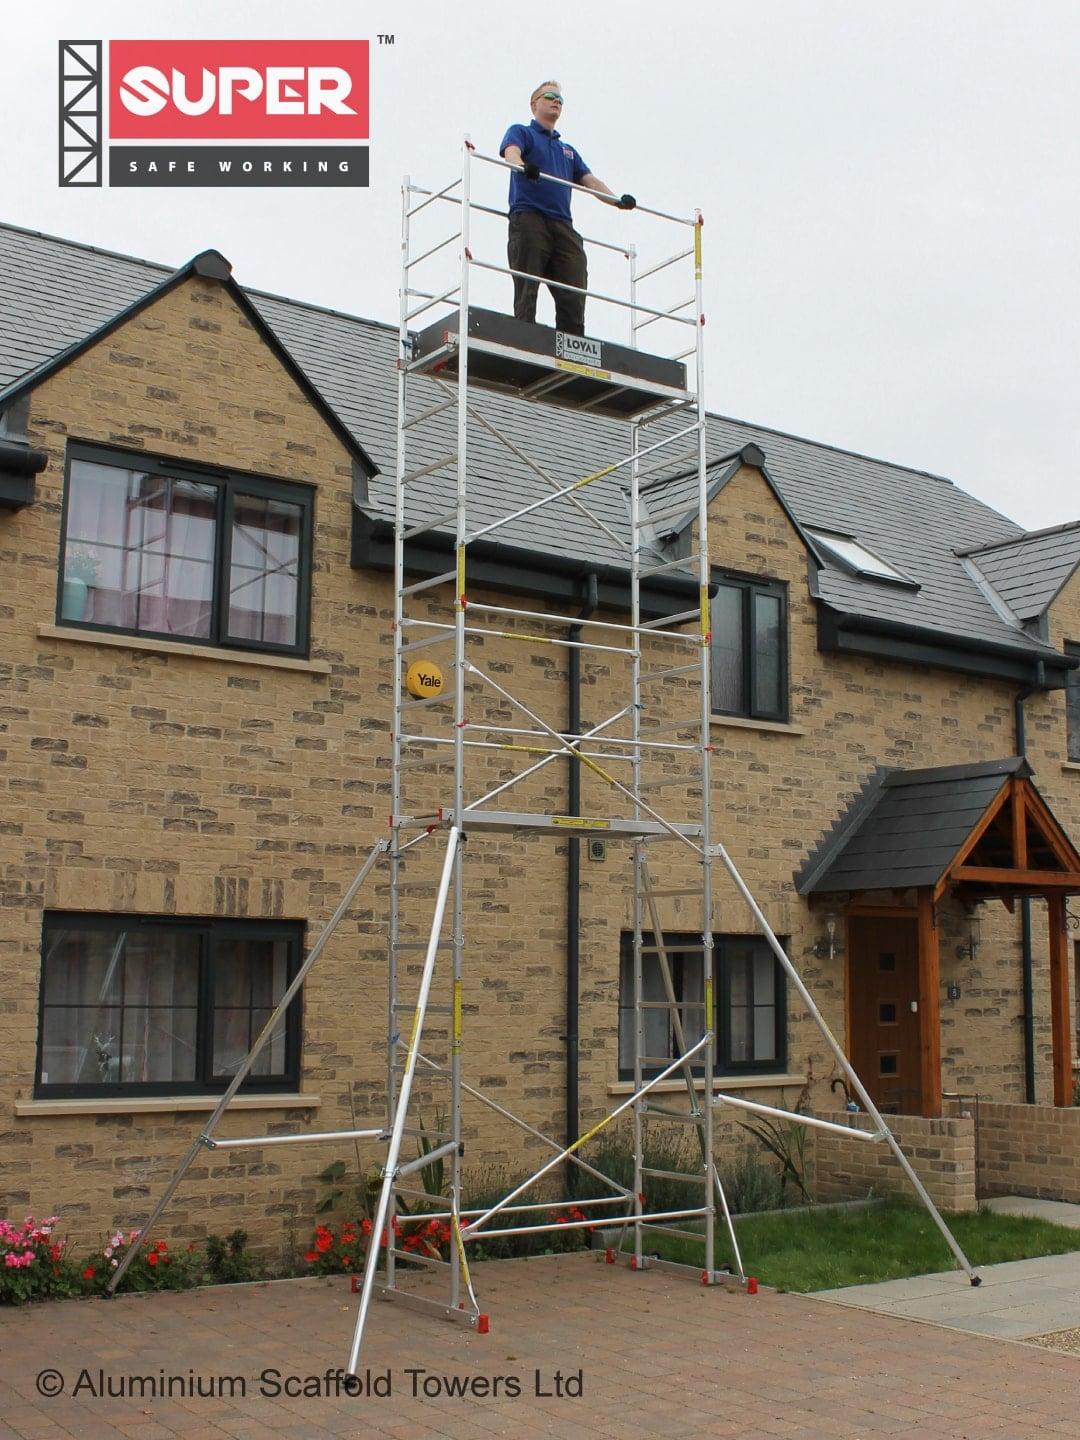 Product MDIY 7 Scaffold Tower with 4 Telescopic Outriggers and Toeboards - Aluminium Scaffold Towers Limited image